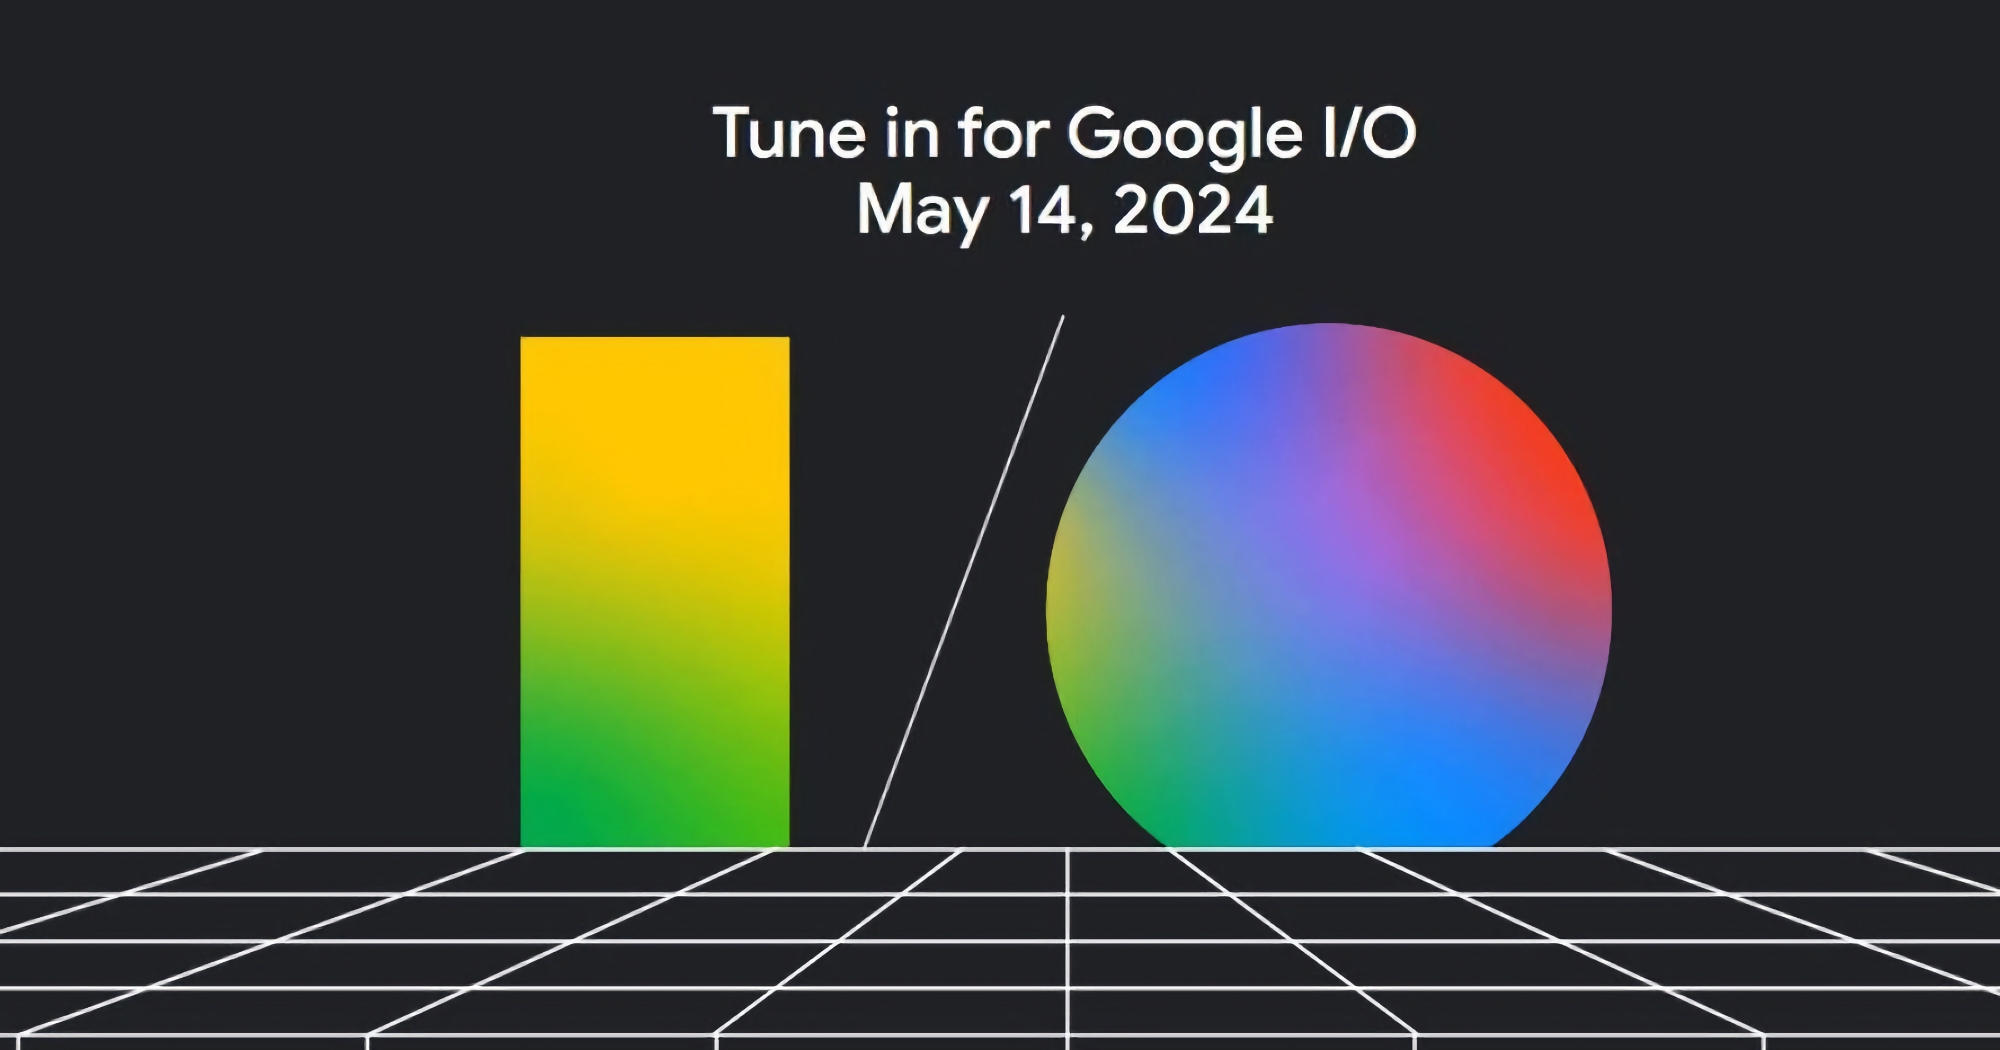 Where and when to watch the Google I/O 2024 conference